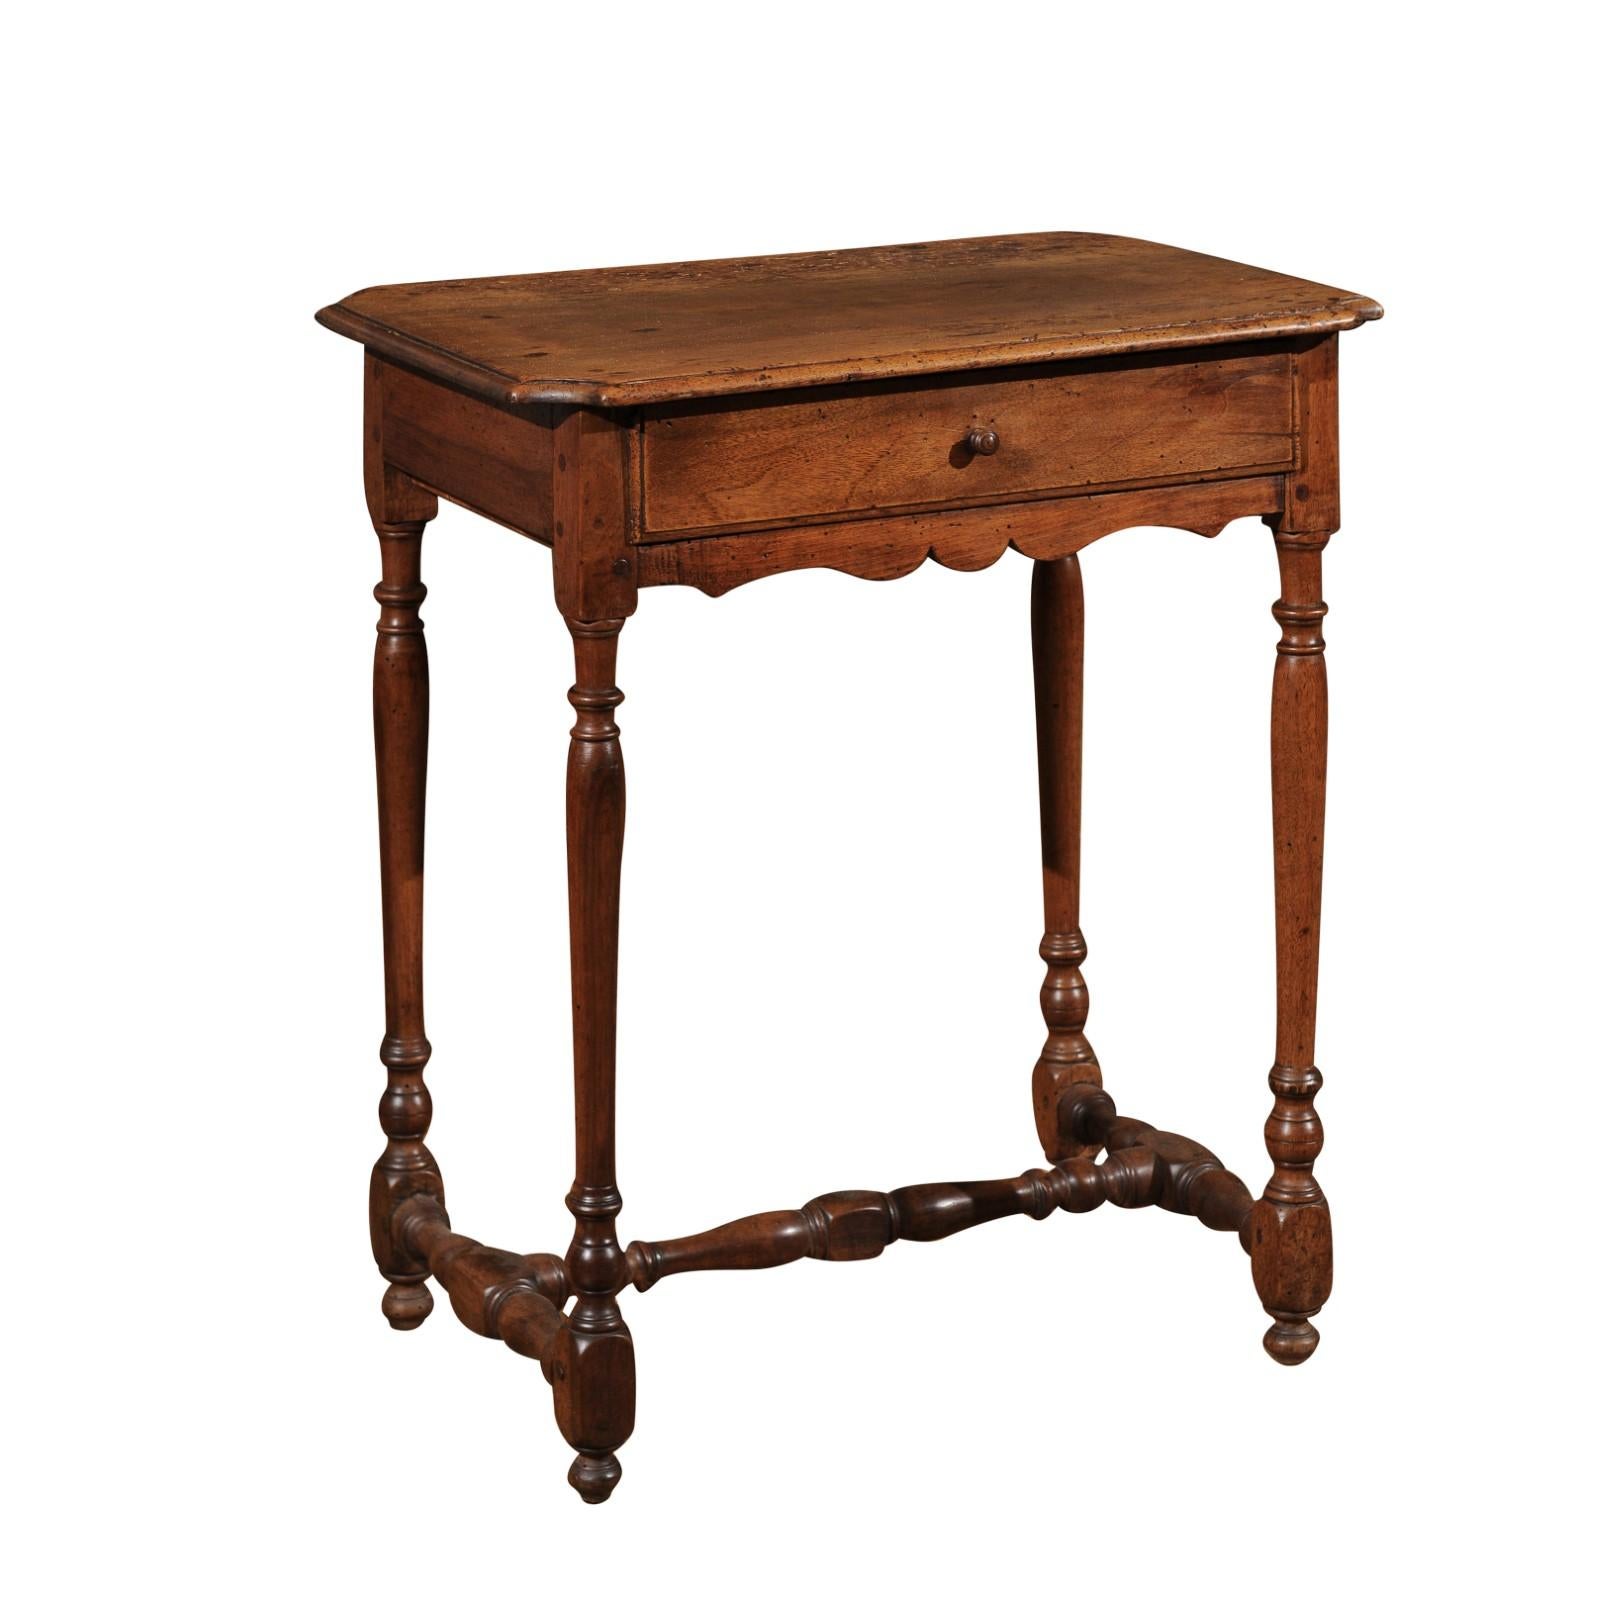 French 1680s Louis XIII Style Carthusian Walnut Side Table with Turned Legs